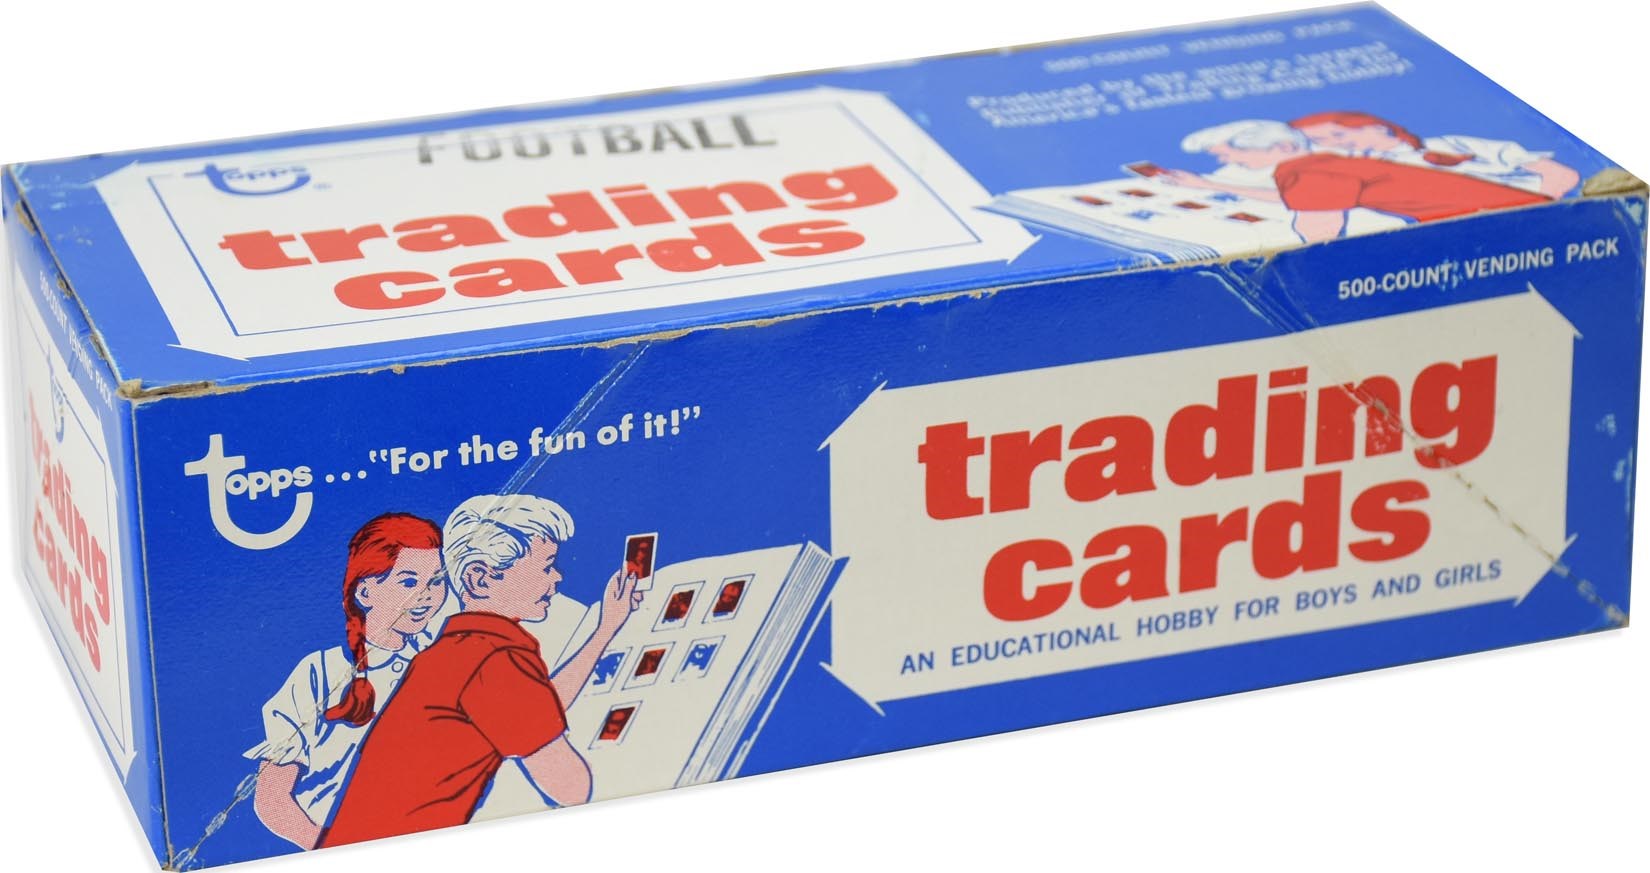 Unopened Wax Packs Boxes and Cases - 1975 Topps Football Unsearched Vending Box